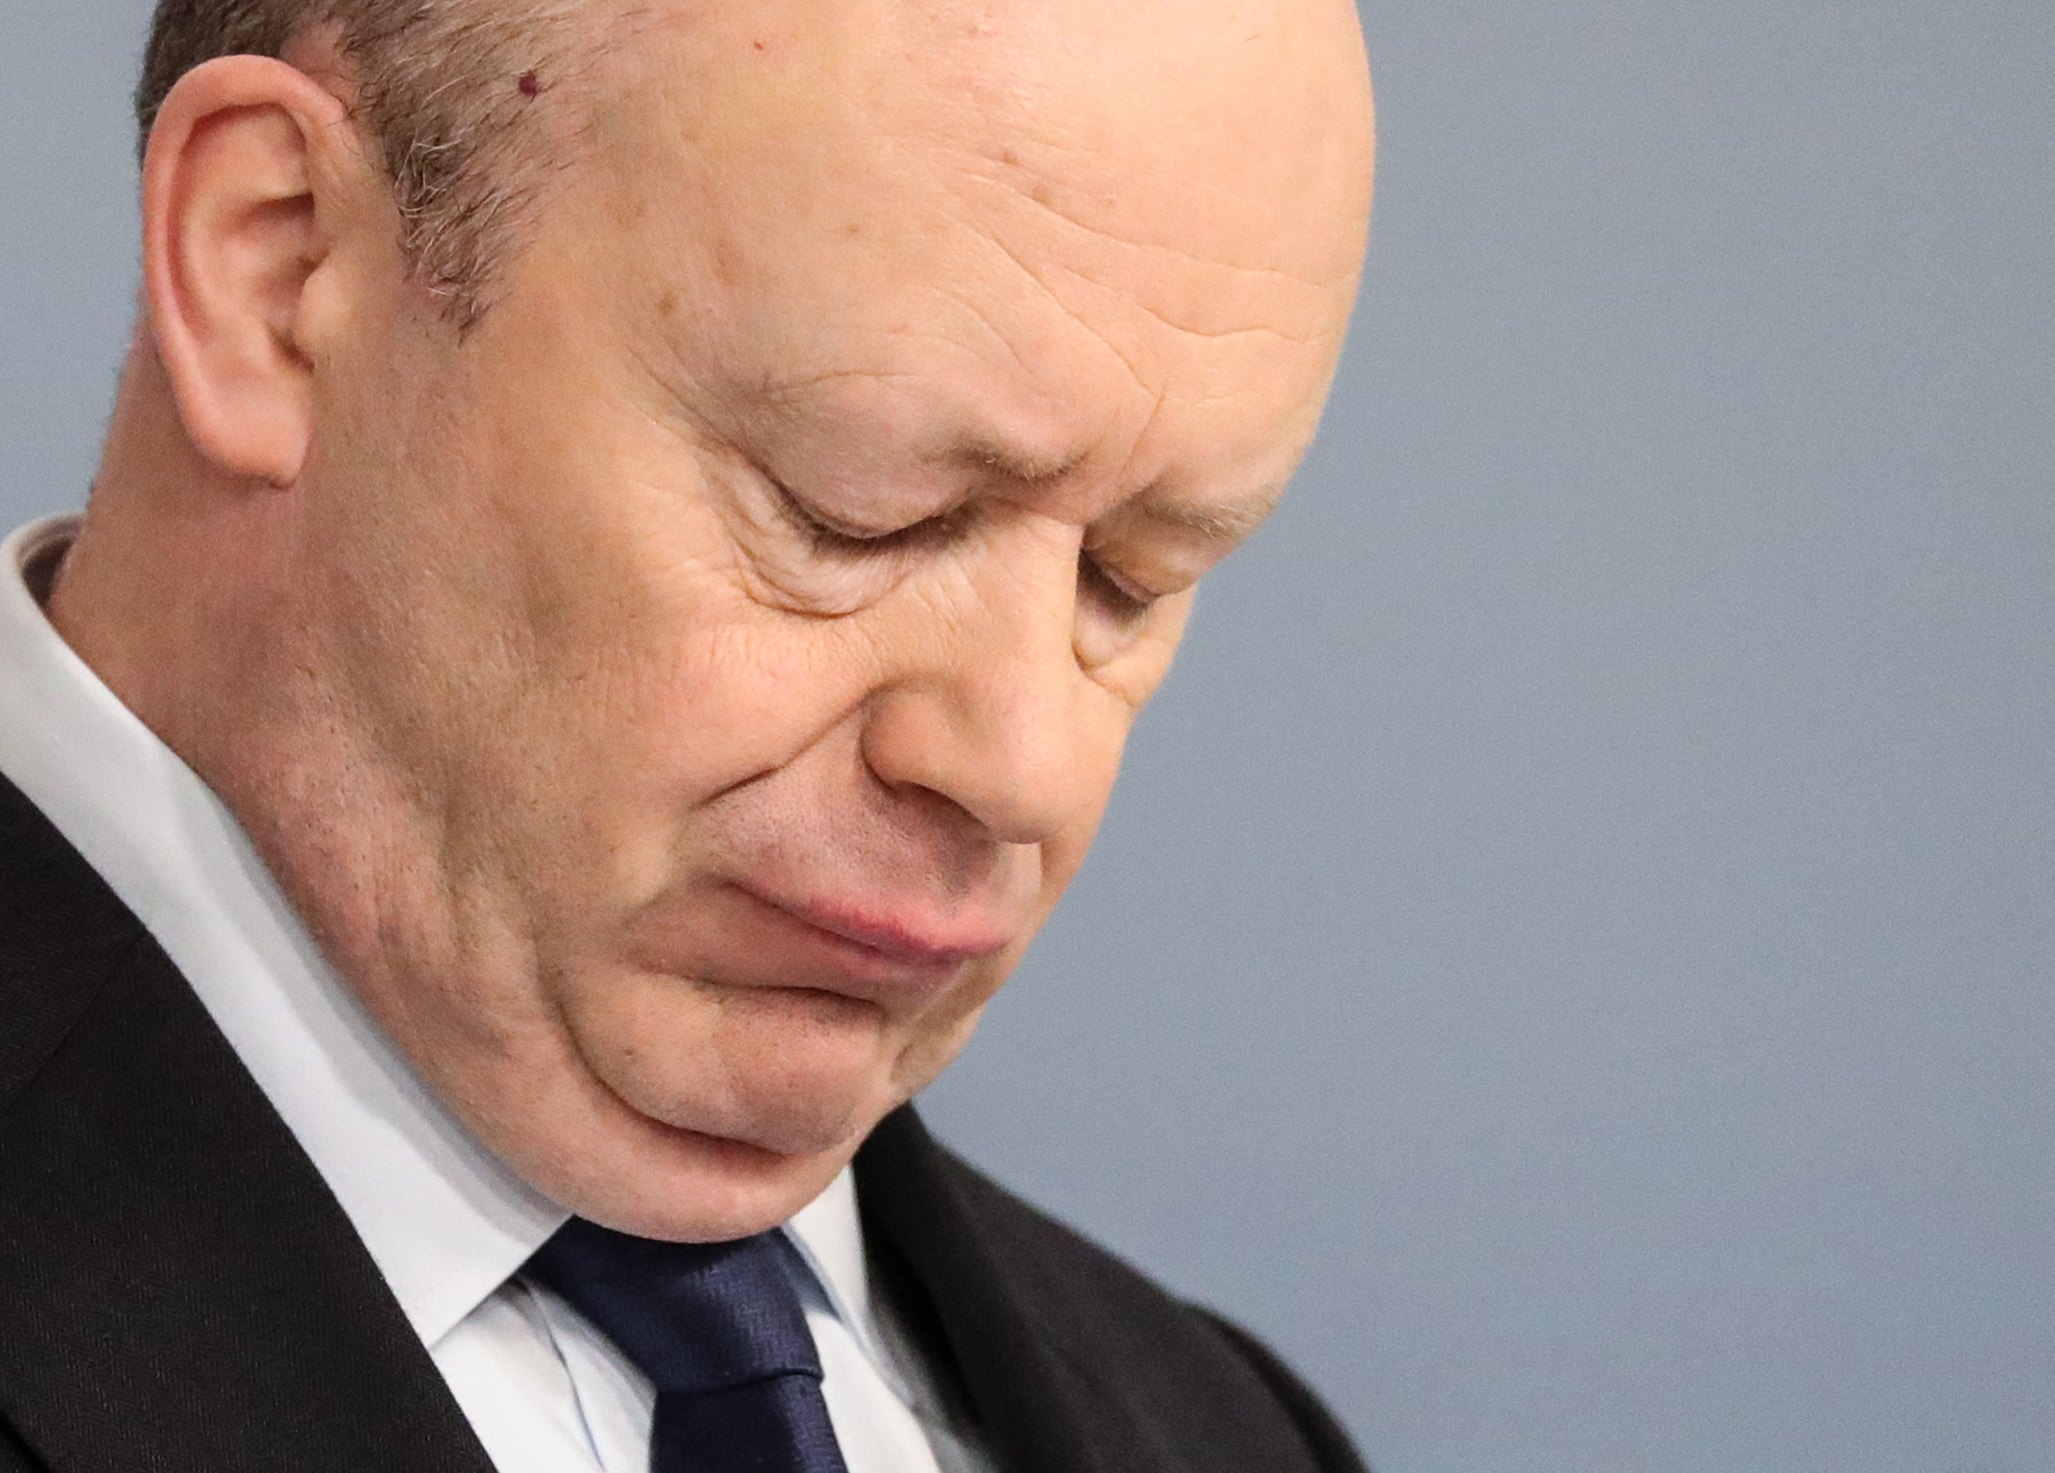 2018-02-02 11:01:45 epa06491435 John Cryan, Chief Executive Officer of Deutsche Bank, reacts during the Annual Media Conference of Deutsche Bank in Frankfurt Main, Germany, 02 February 2018. EPA/ARMANDO BABANI